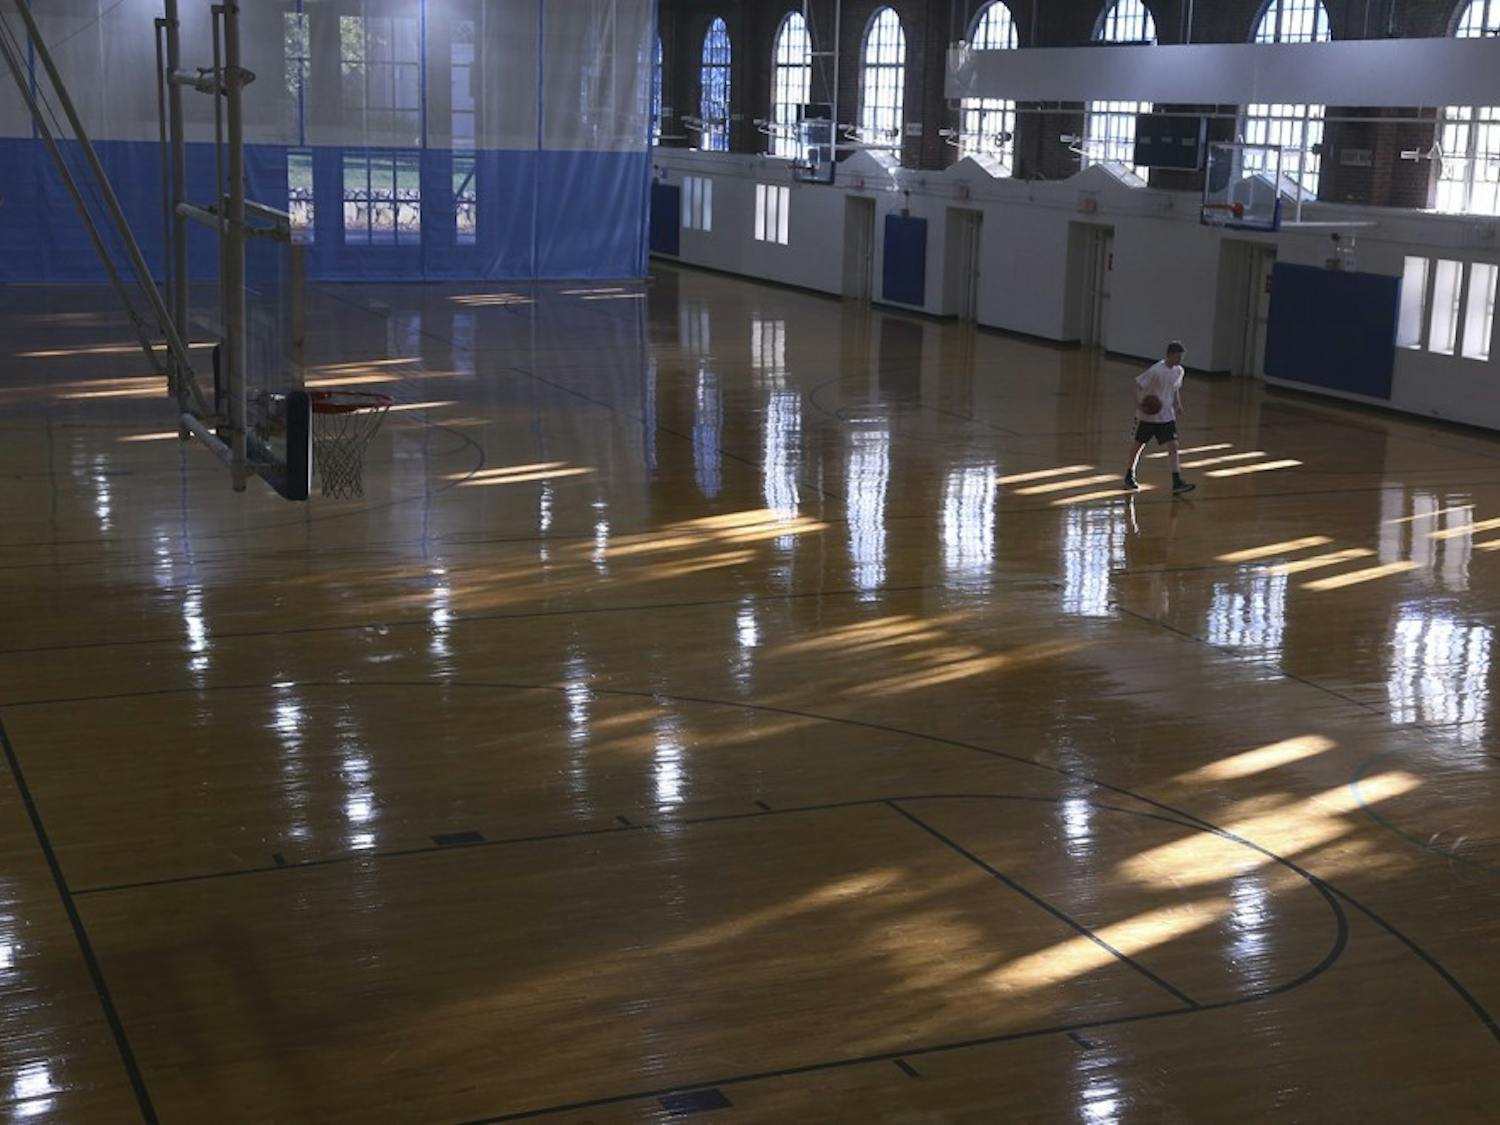 Basketball players frequent Woolen Gym for pickup games.